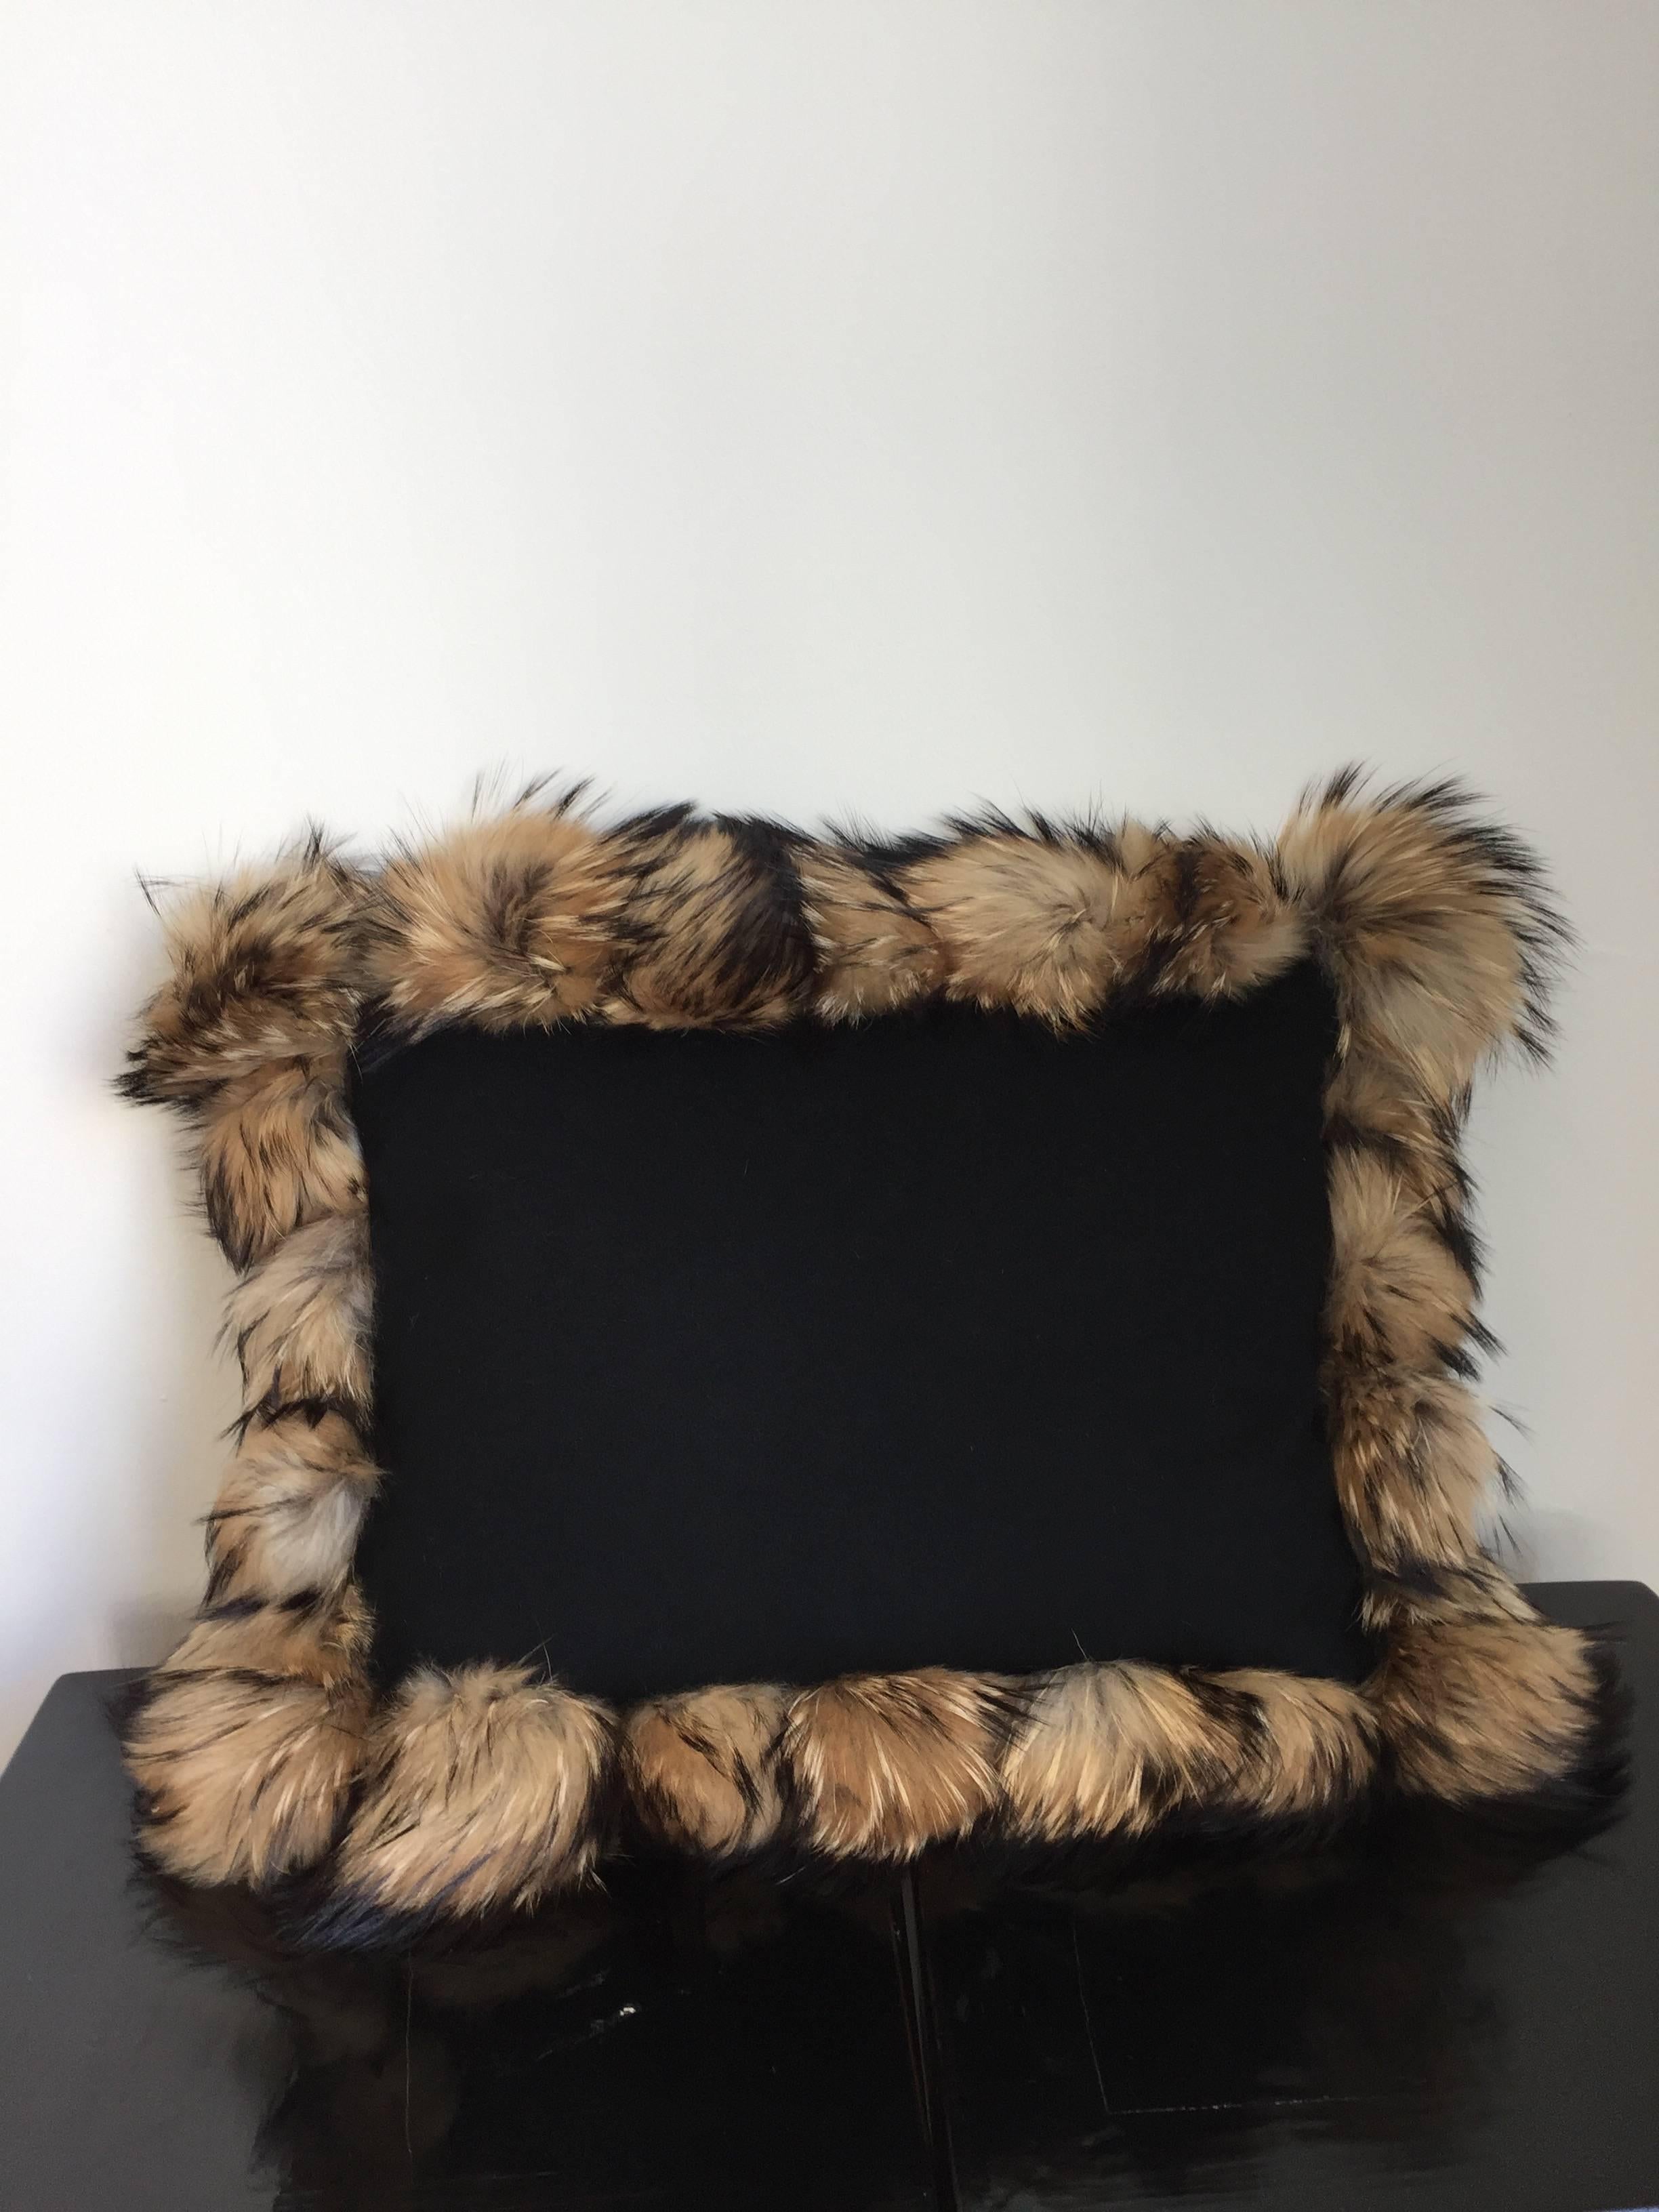 Decorative cushions in 100% Cashmere wool color black with fur trim Raccoon Pompons,
total size about 65 x 55cm incl. Trim, size 50 x 40cm for Cashmere cushions plus fur trim made from single Raccoon Pompons, cushion covers are lined with lining